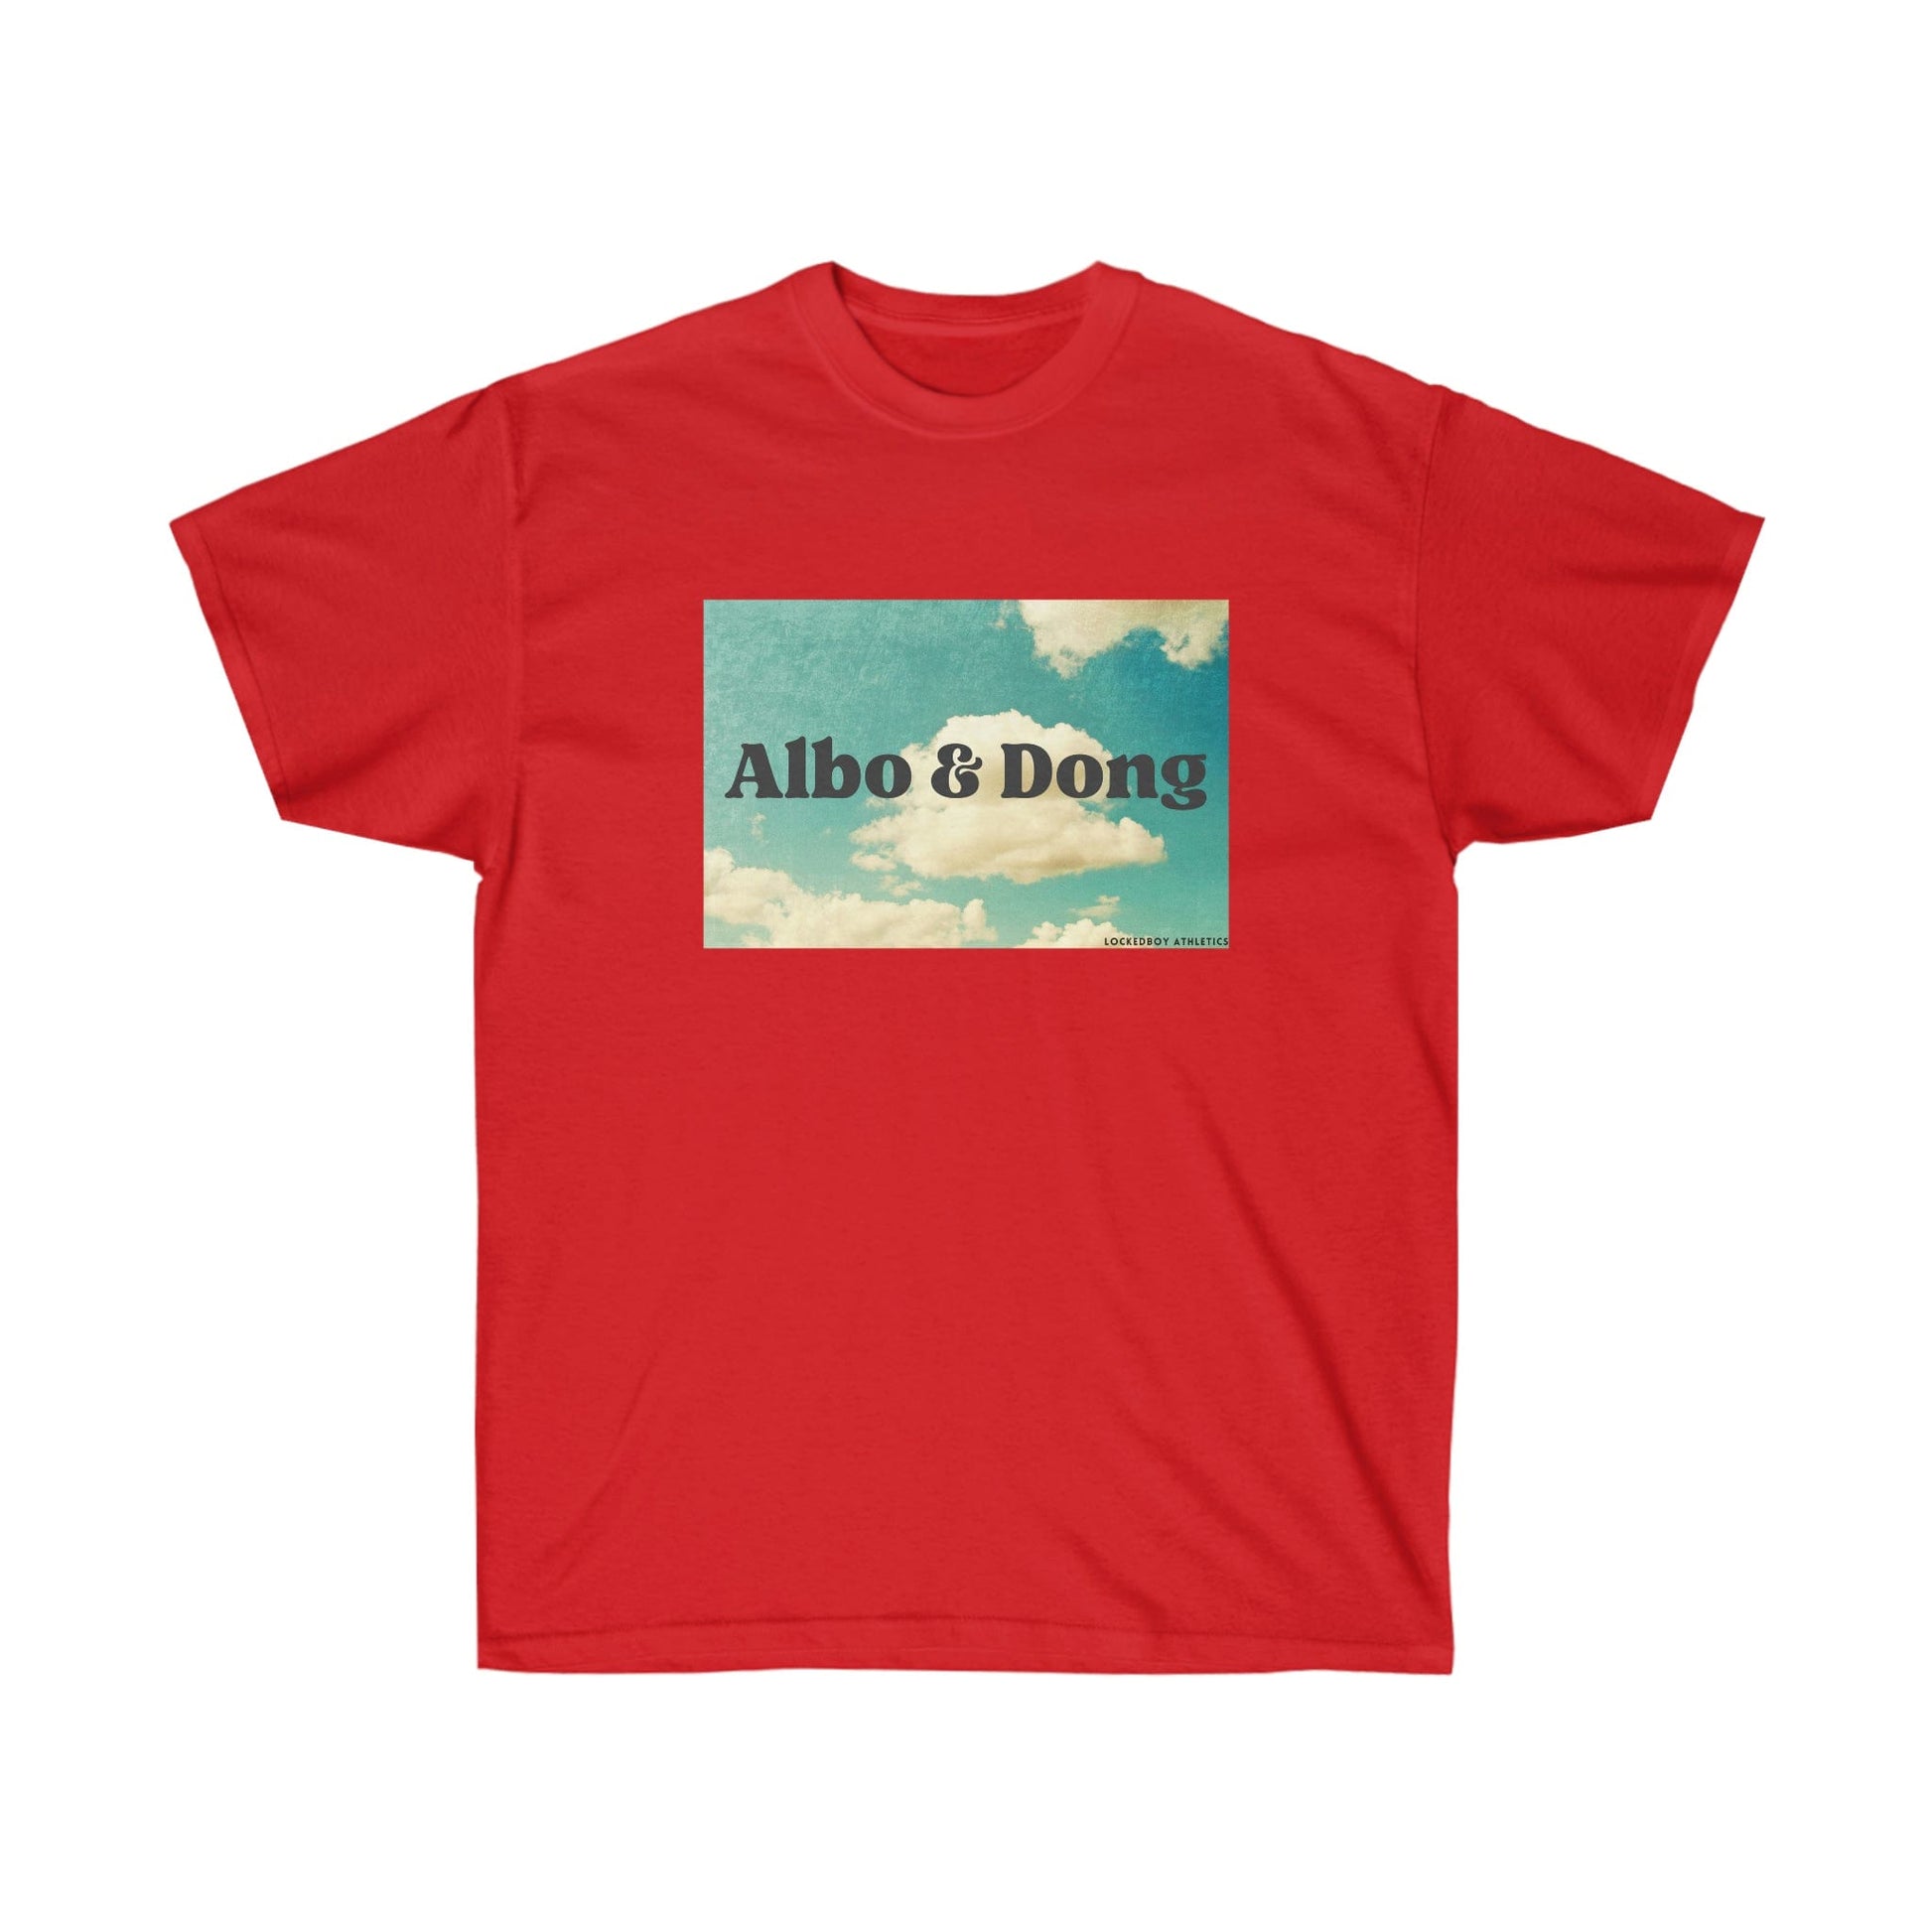 T-Shirt Red / S Albo & Dong LEATHERDADDY BATOR